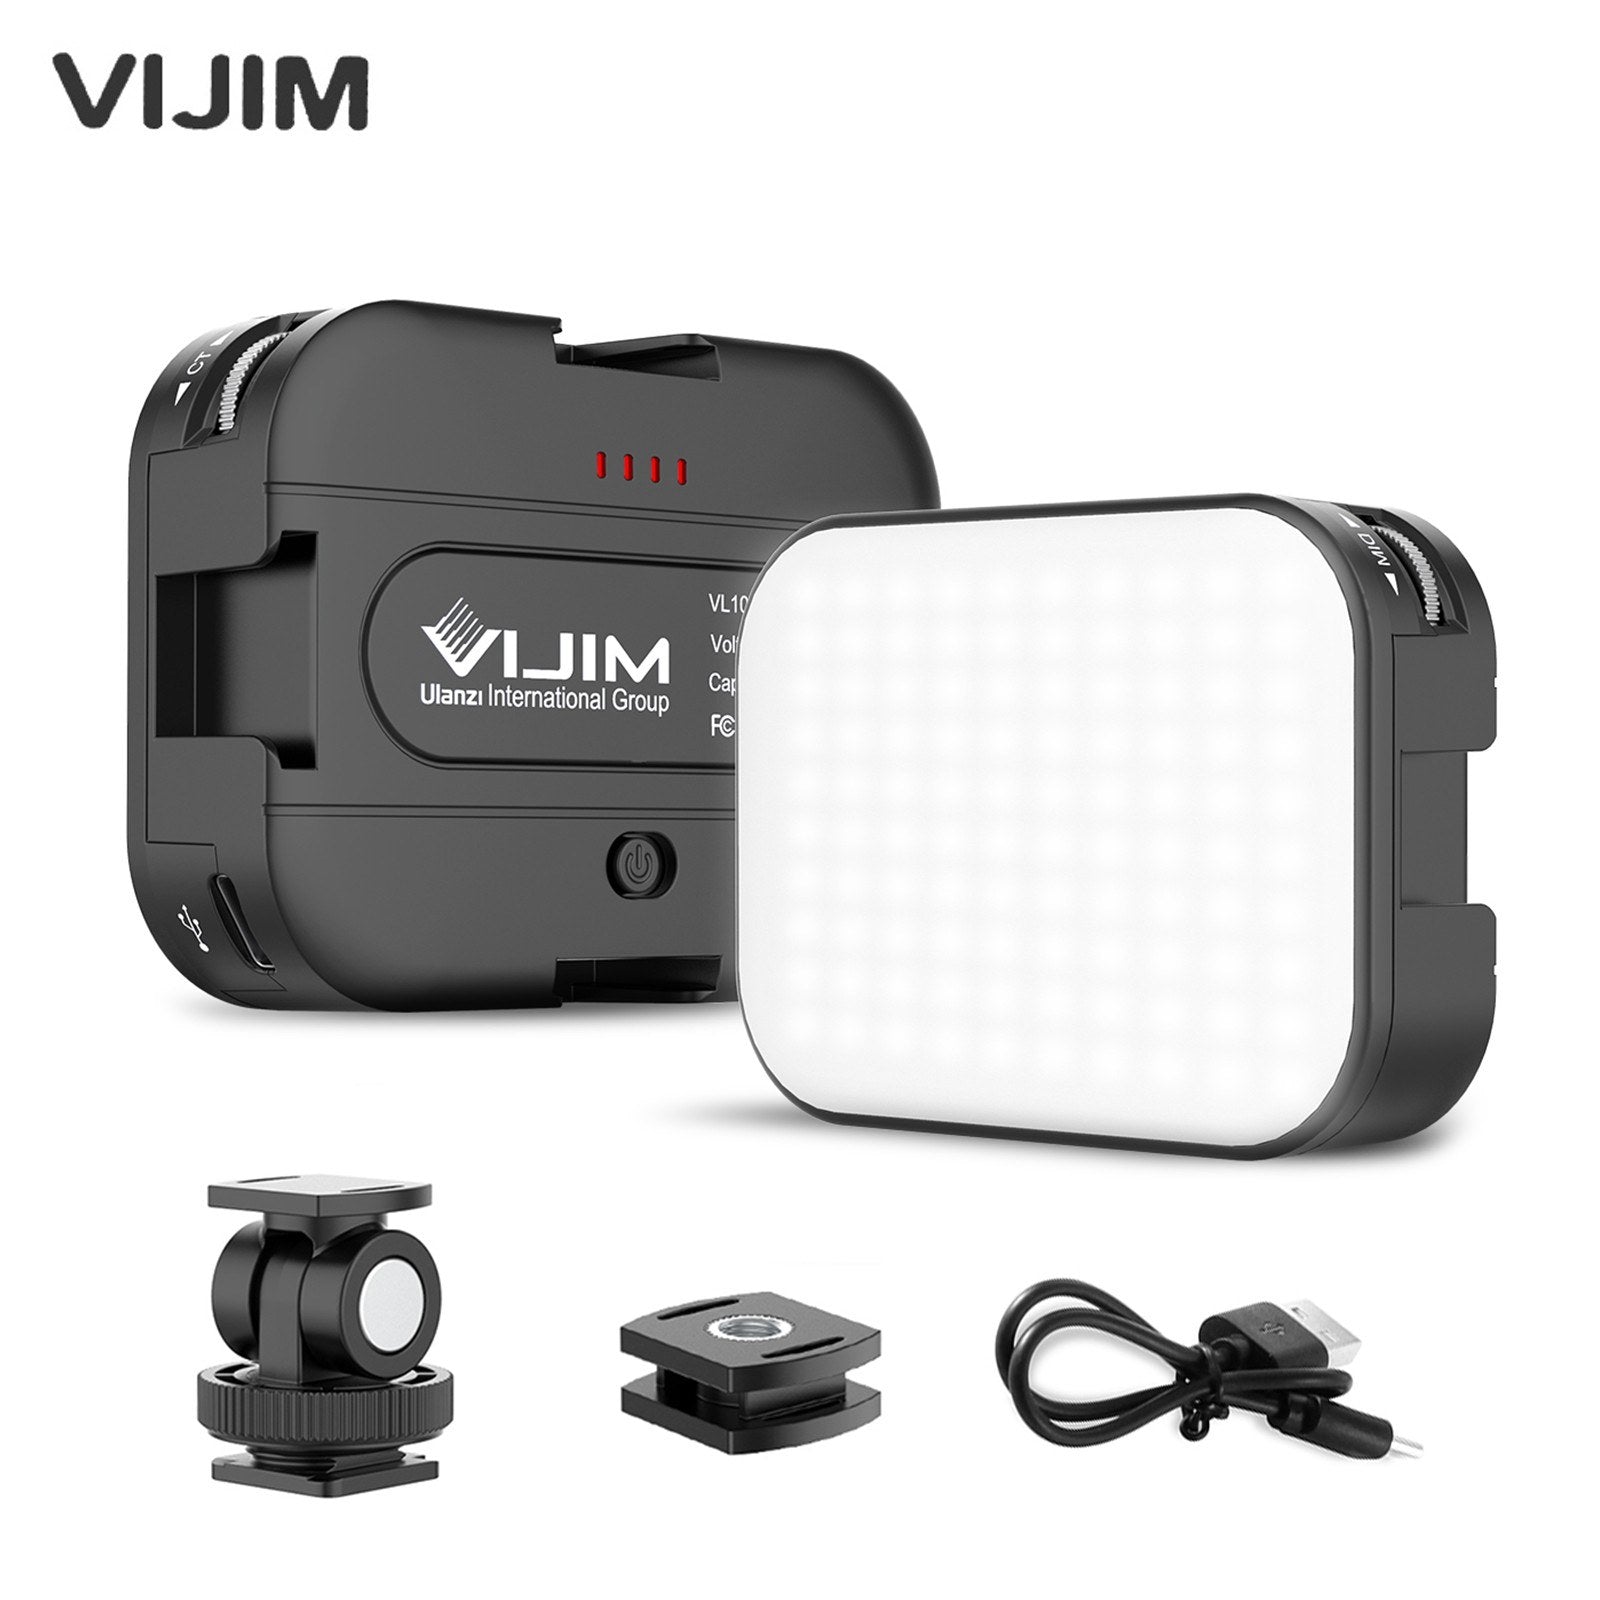 VIJIM VL100C Mini Video LED Light 6W CRI95 3200K-6500K Stepless Dimmable with Triple Cold Shoe Built-in Rechargeable 2000mAh Battery